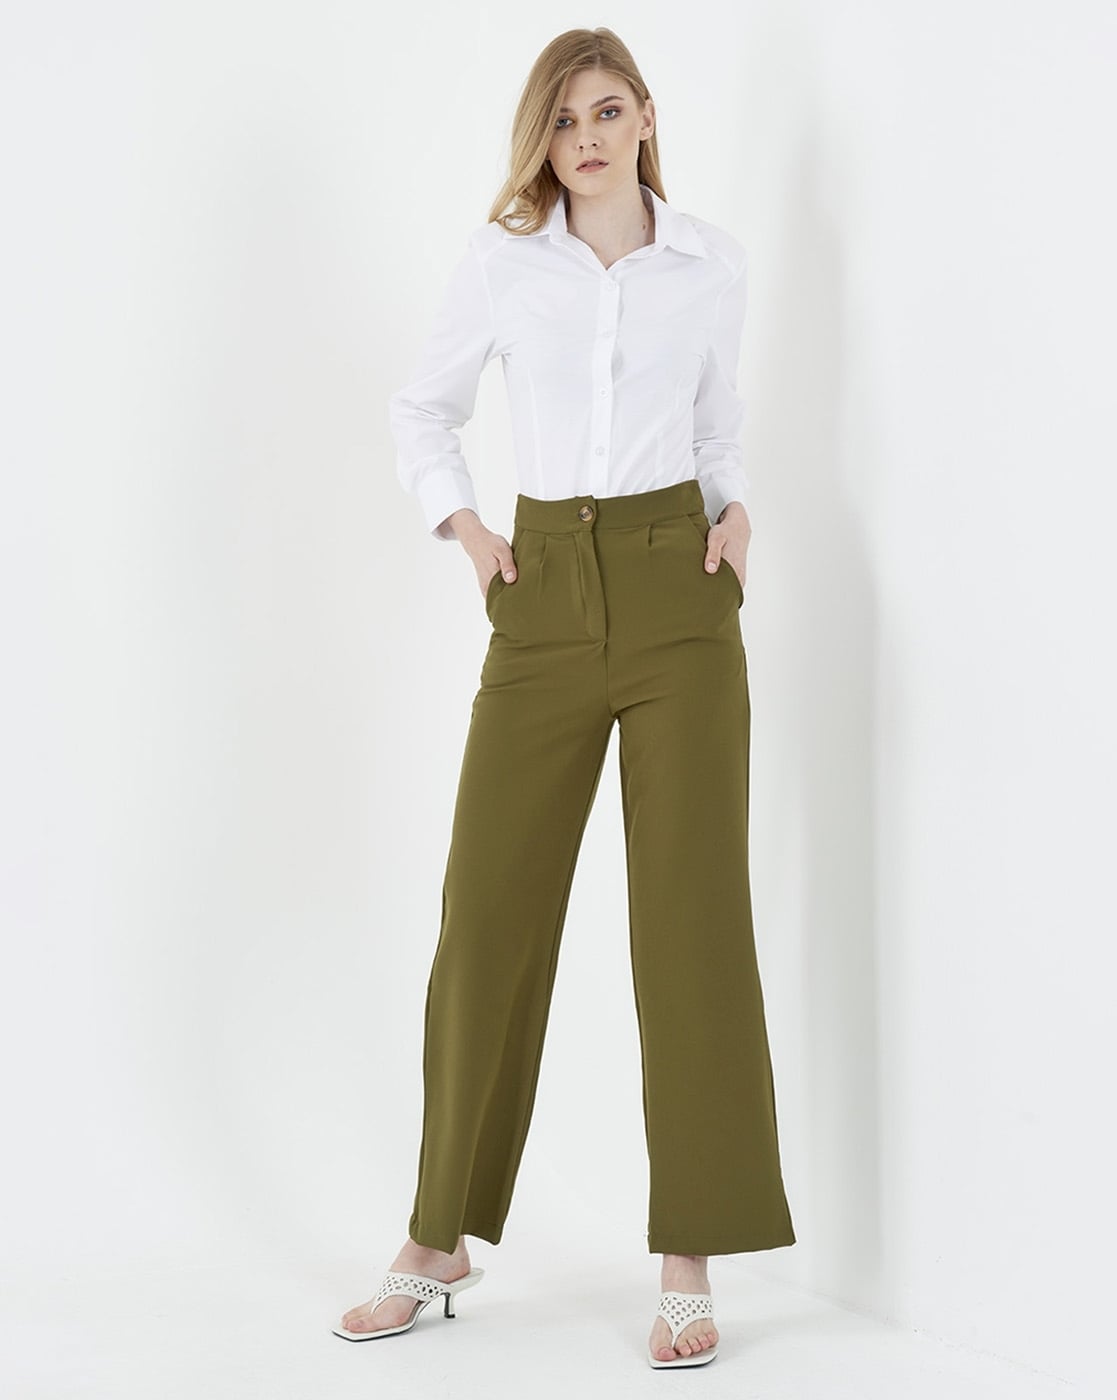 15 Olive Green Pant Outfit Ideas For Women Comfy  Stylish  Green pants  outfit Olive green pants outfit Olive pants outfit